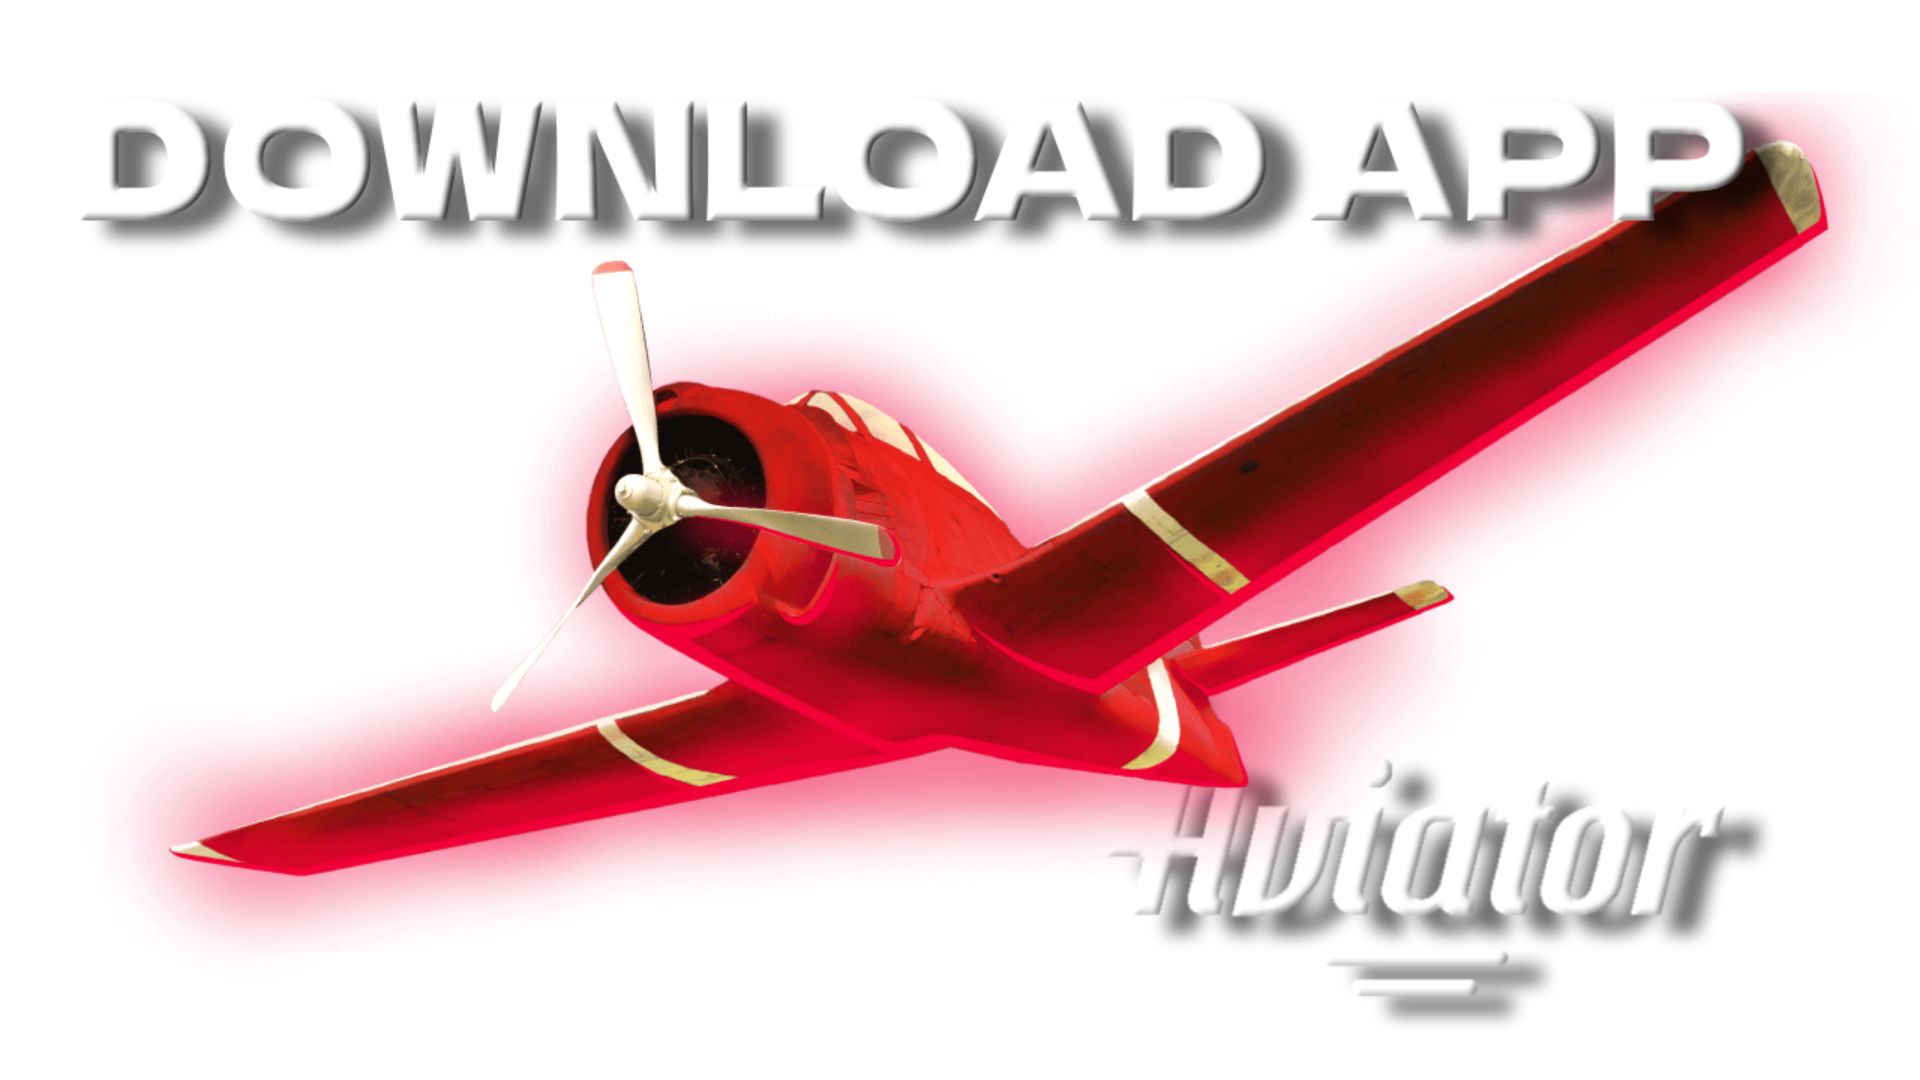 How to Download the Aviator Game